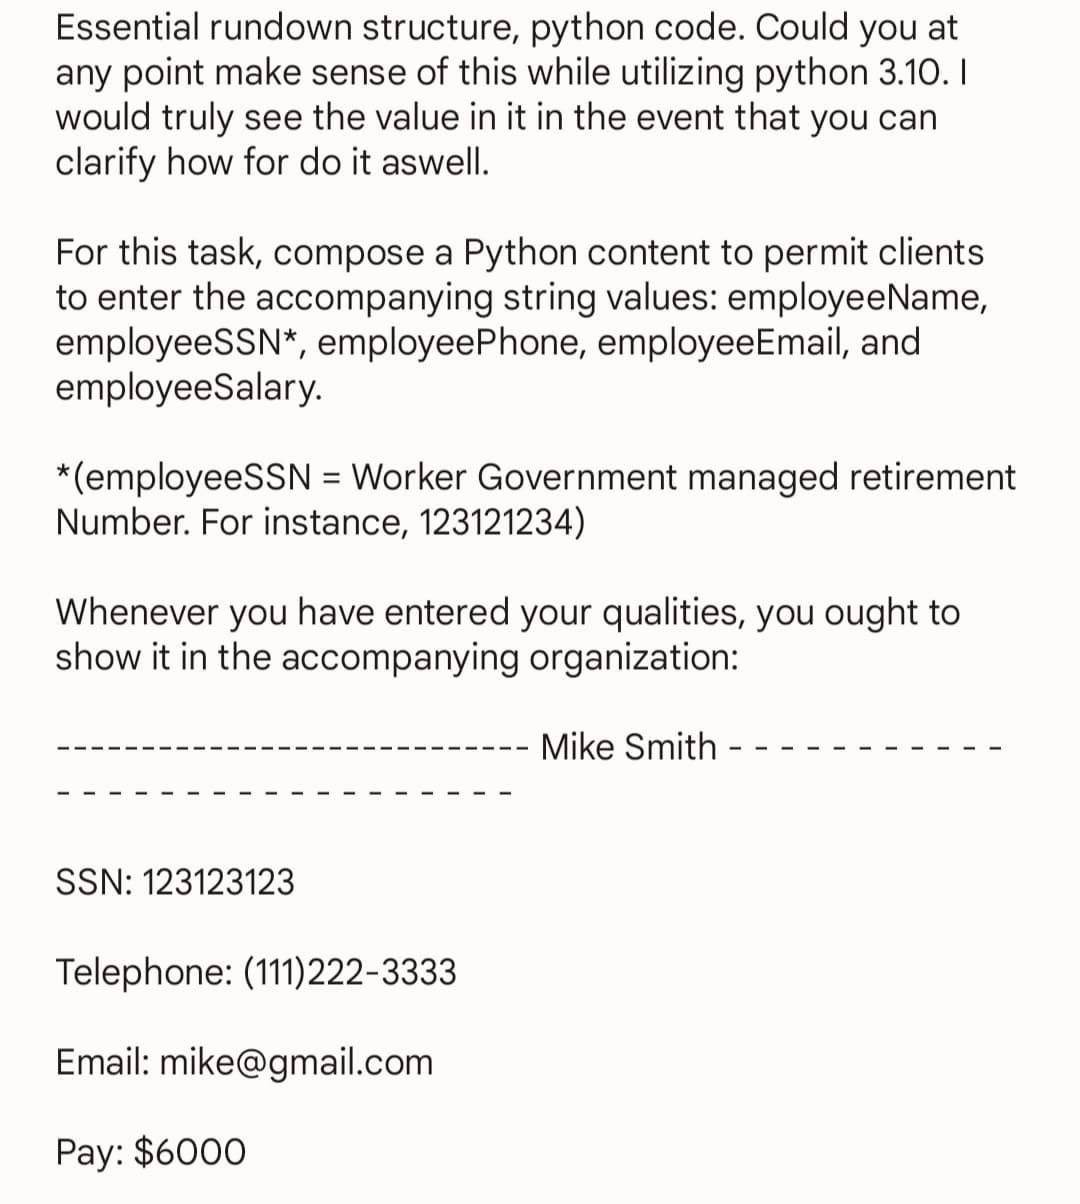 Essential rundown structure, python code. Could you at
any point make sense of this while utilizing python 3.10.1
would truly see the value in it in the event that you can
clarify how for do it aswell.
For this task, compose a Python content to permit clients
to enter the accompanying string values: employeeName,
employeeSSN*, employeePhone, employeeEmail, and
employeeSalary.
*(employeeSSN = Worker Government managed retirement
Number. For instance, 123121234)
Whenever you have entered your qualities, you ought to
show it in the accompanying organization:
SSN: 123123123
Telephone: (111)222-3333
Email: mike@gmail.com
Pay: $6000
Mike Smith -